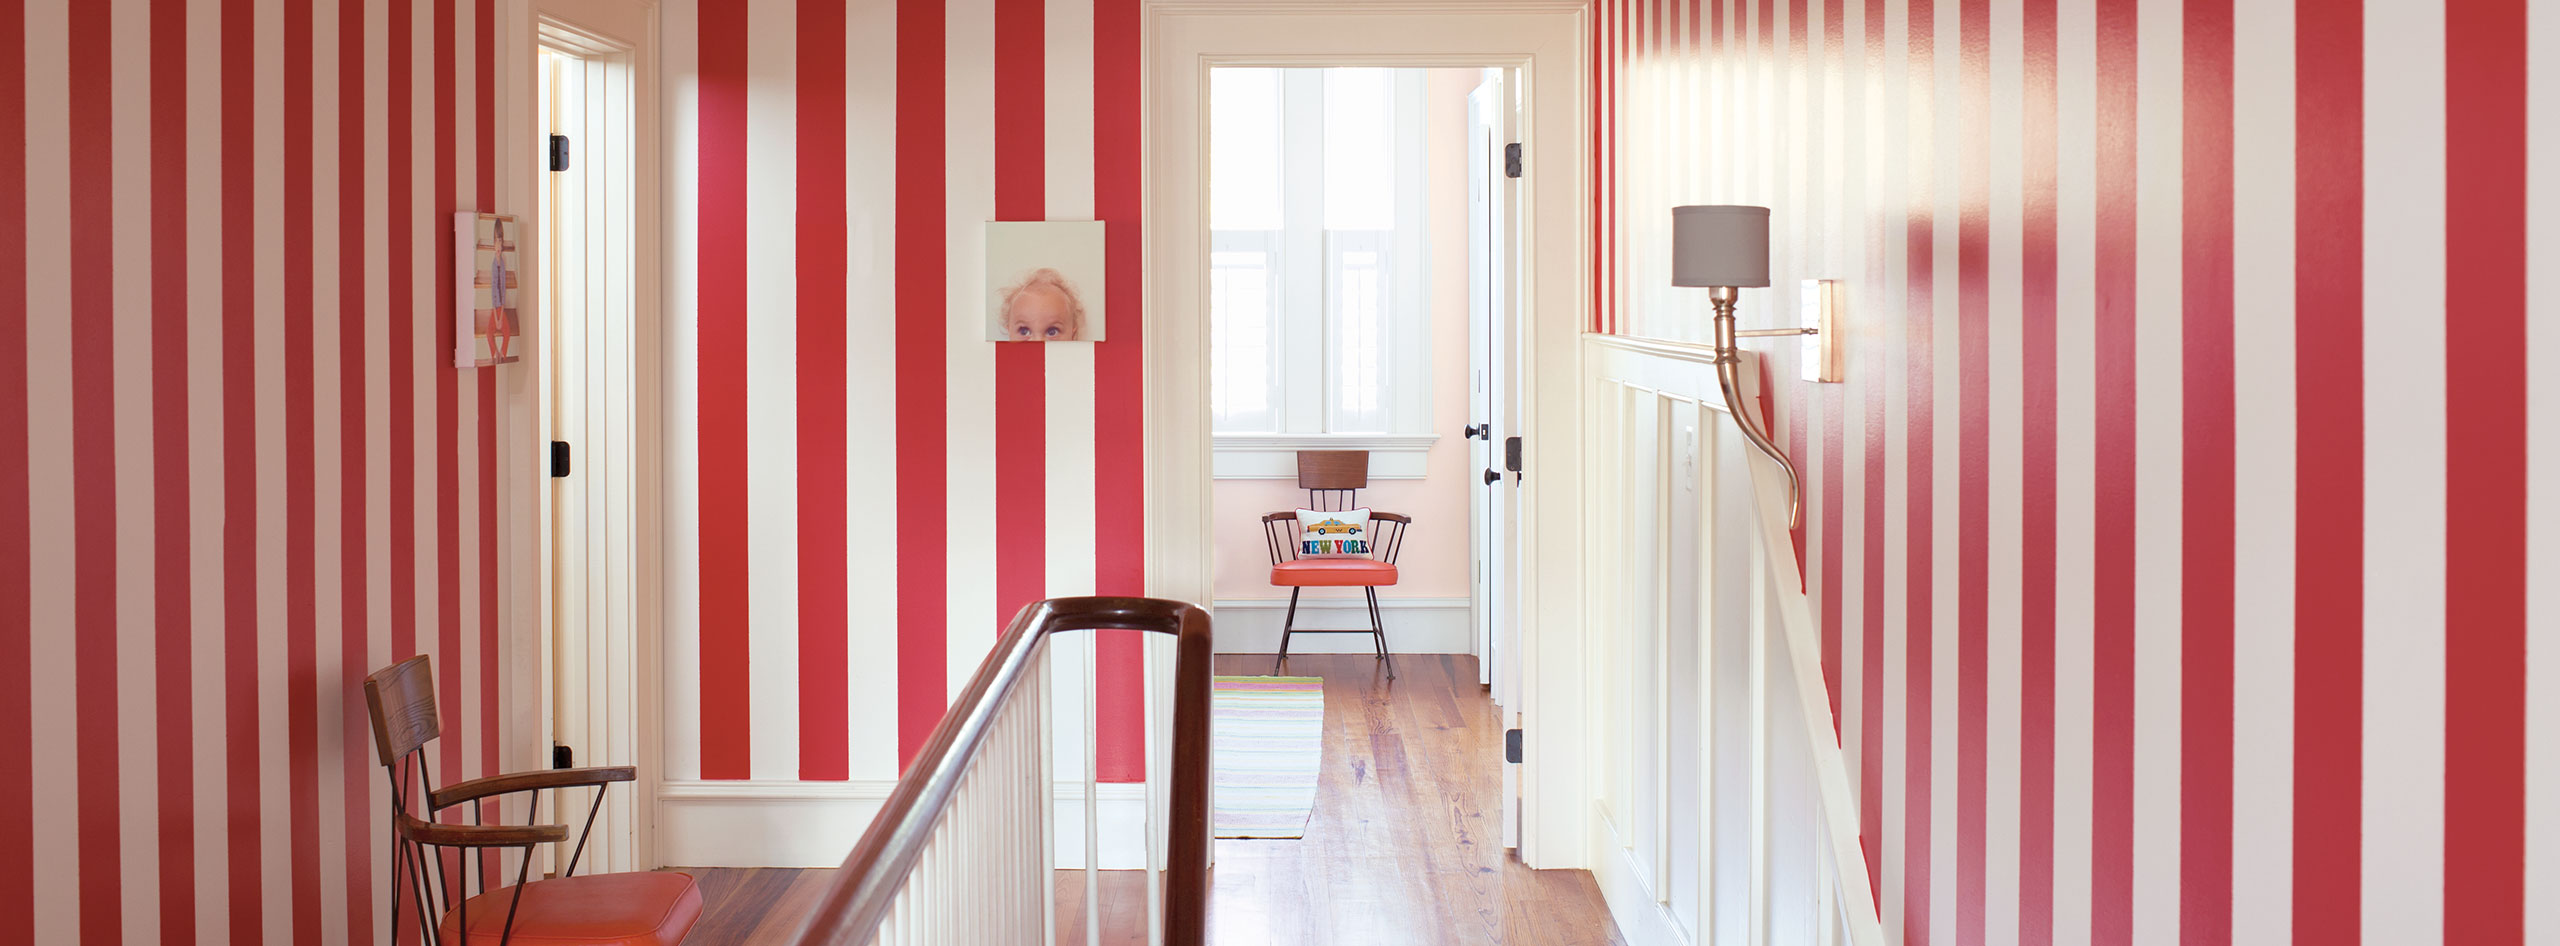 Hallway with red- and white-stripe painted walls, midcentury chair, funky wall art, white trim and wainscotting, and stairs.